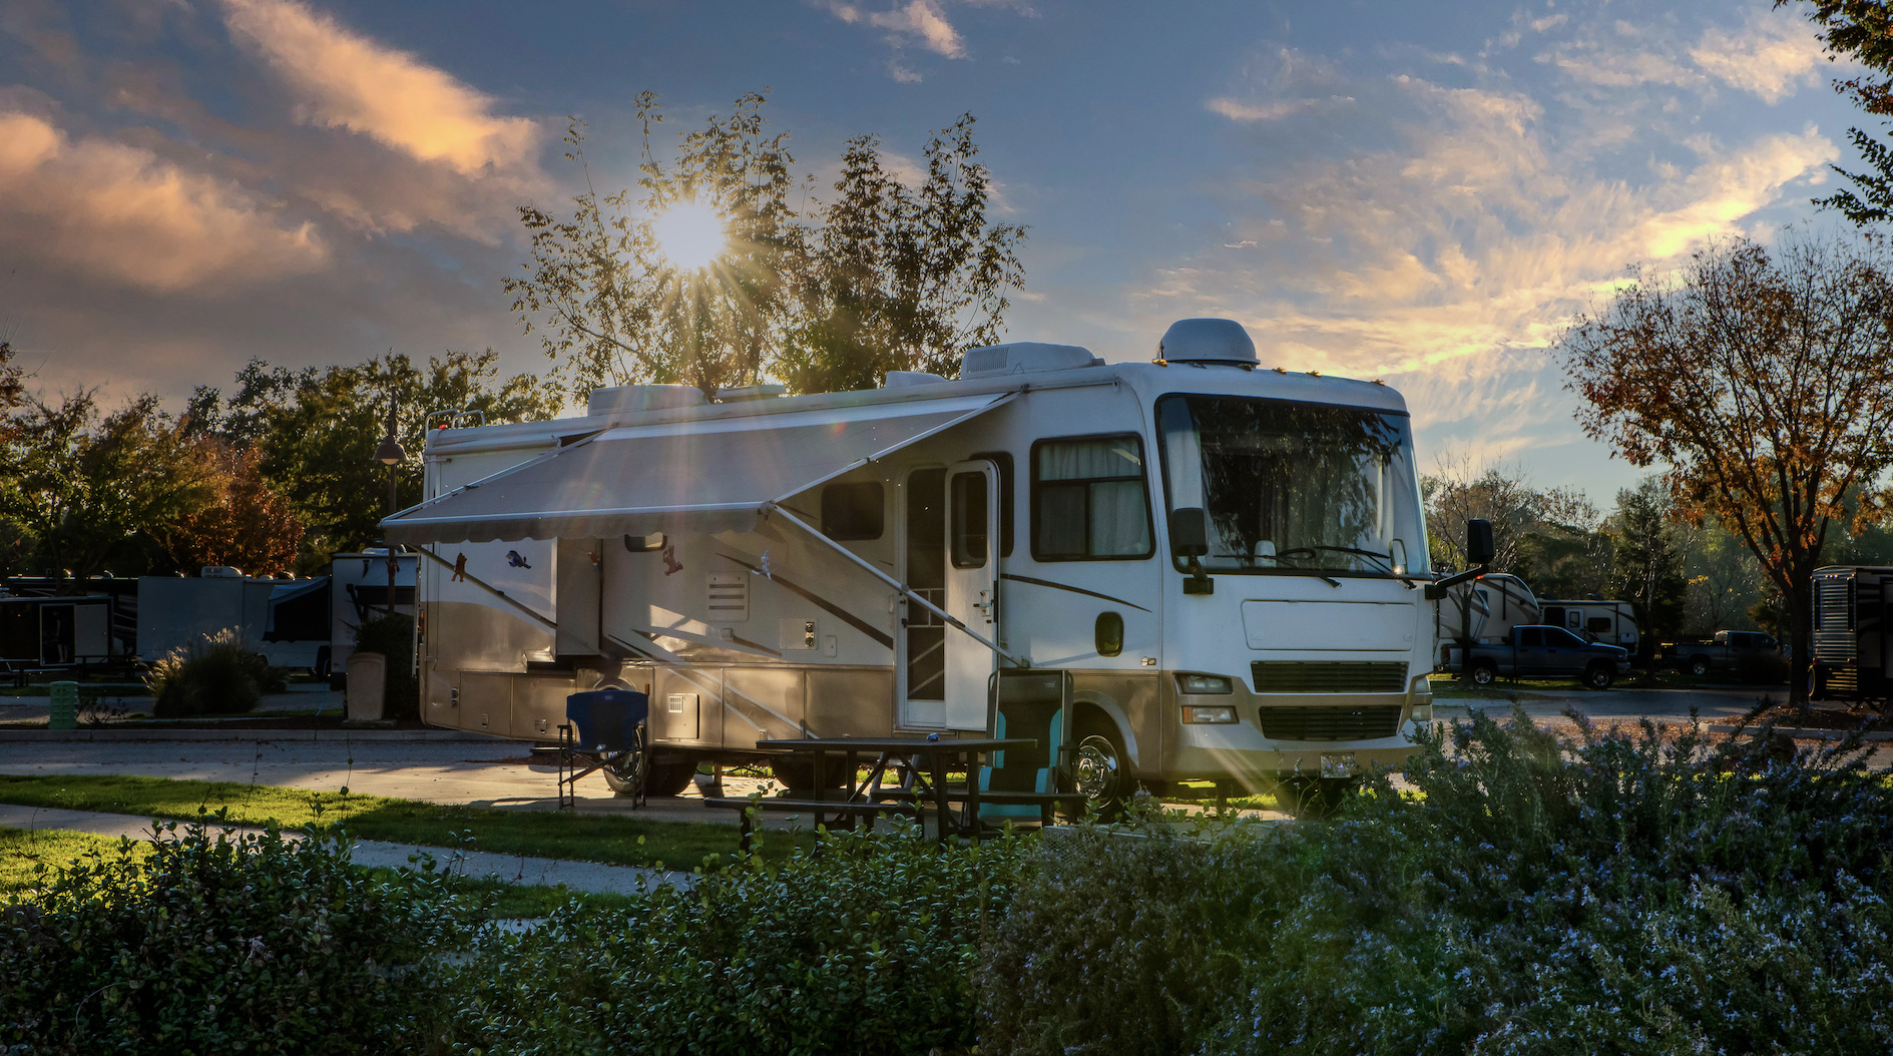 Camper Van Budget: The Cost of Living in a Motorhome Full-Time